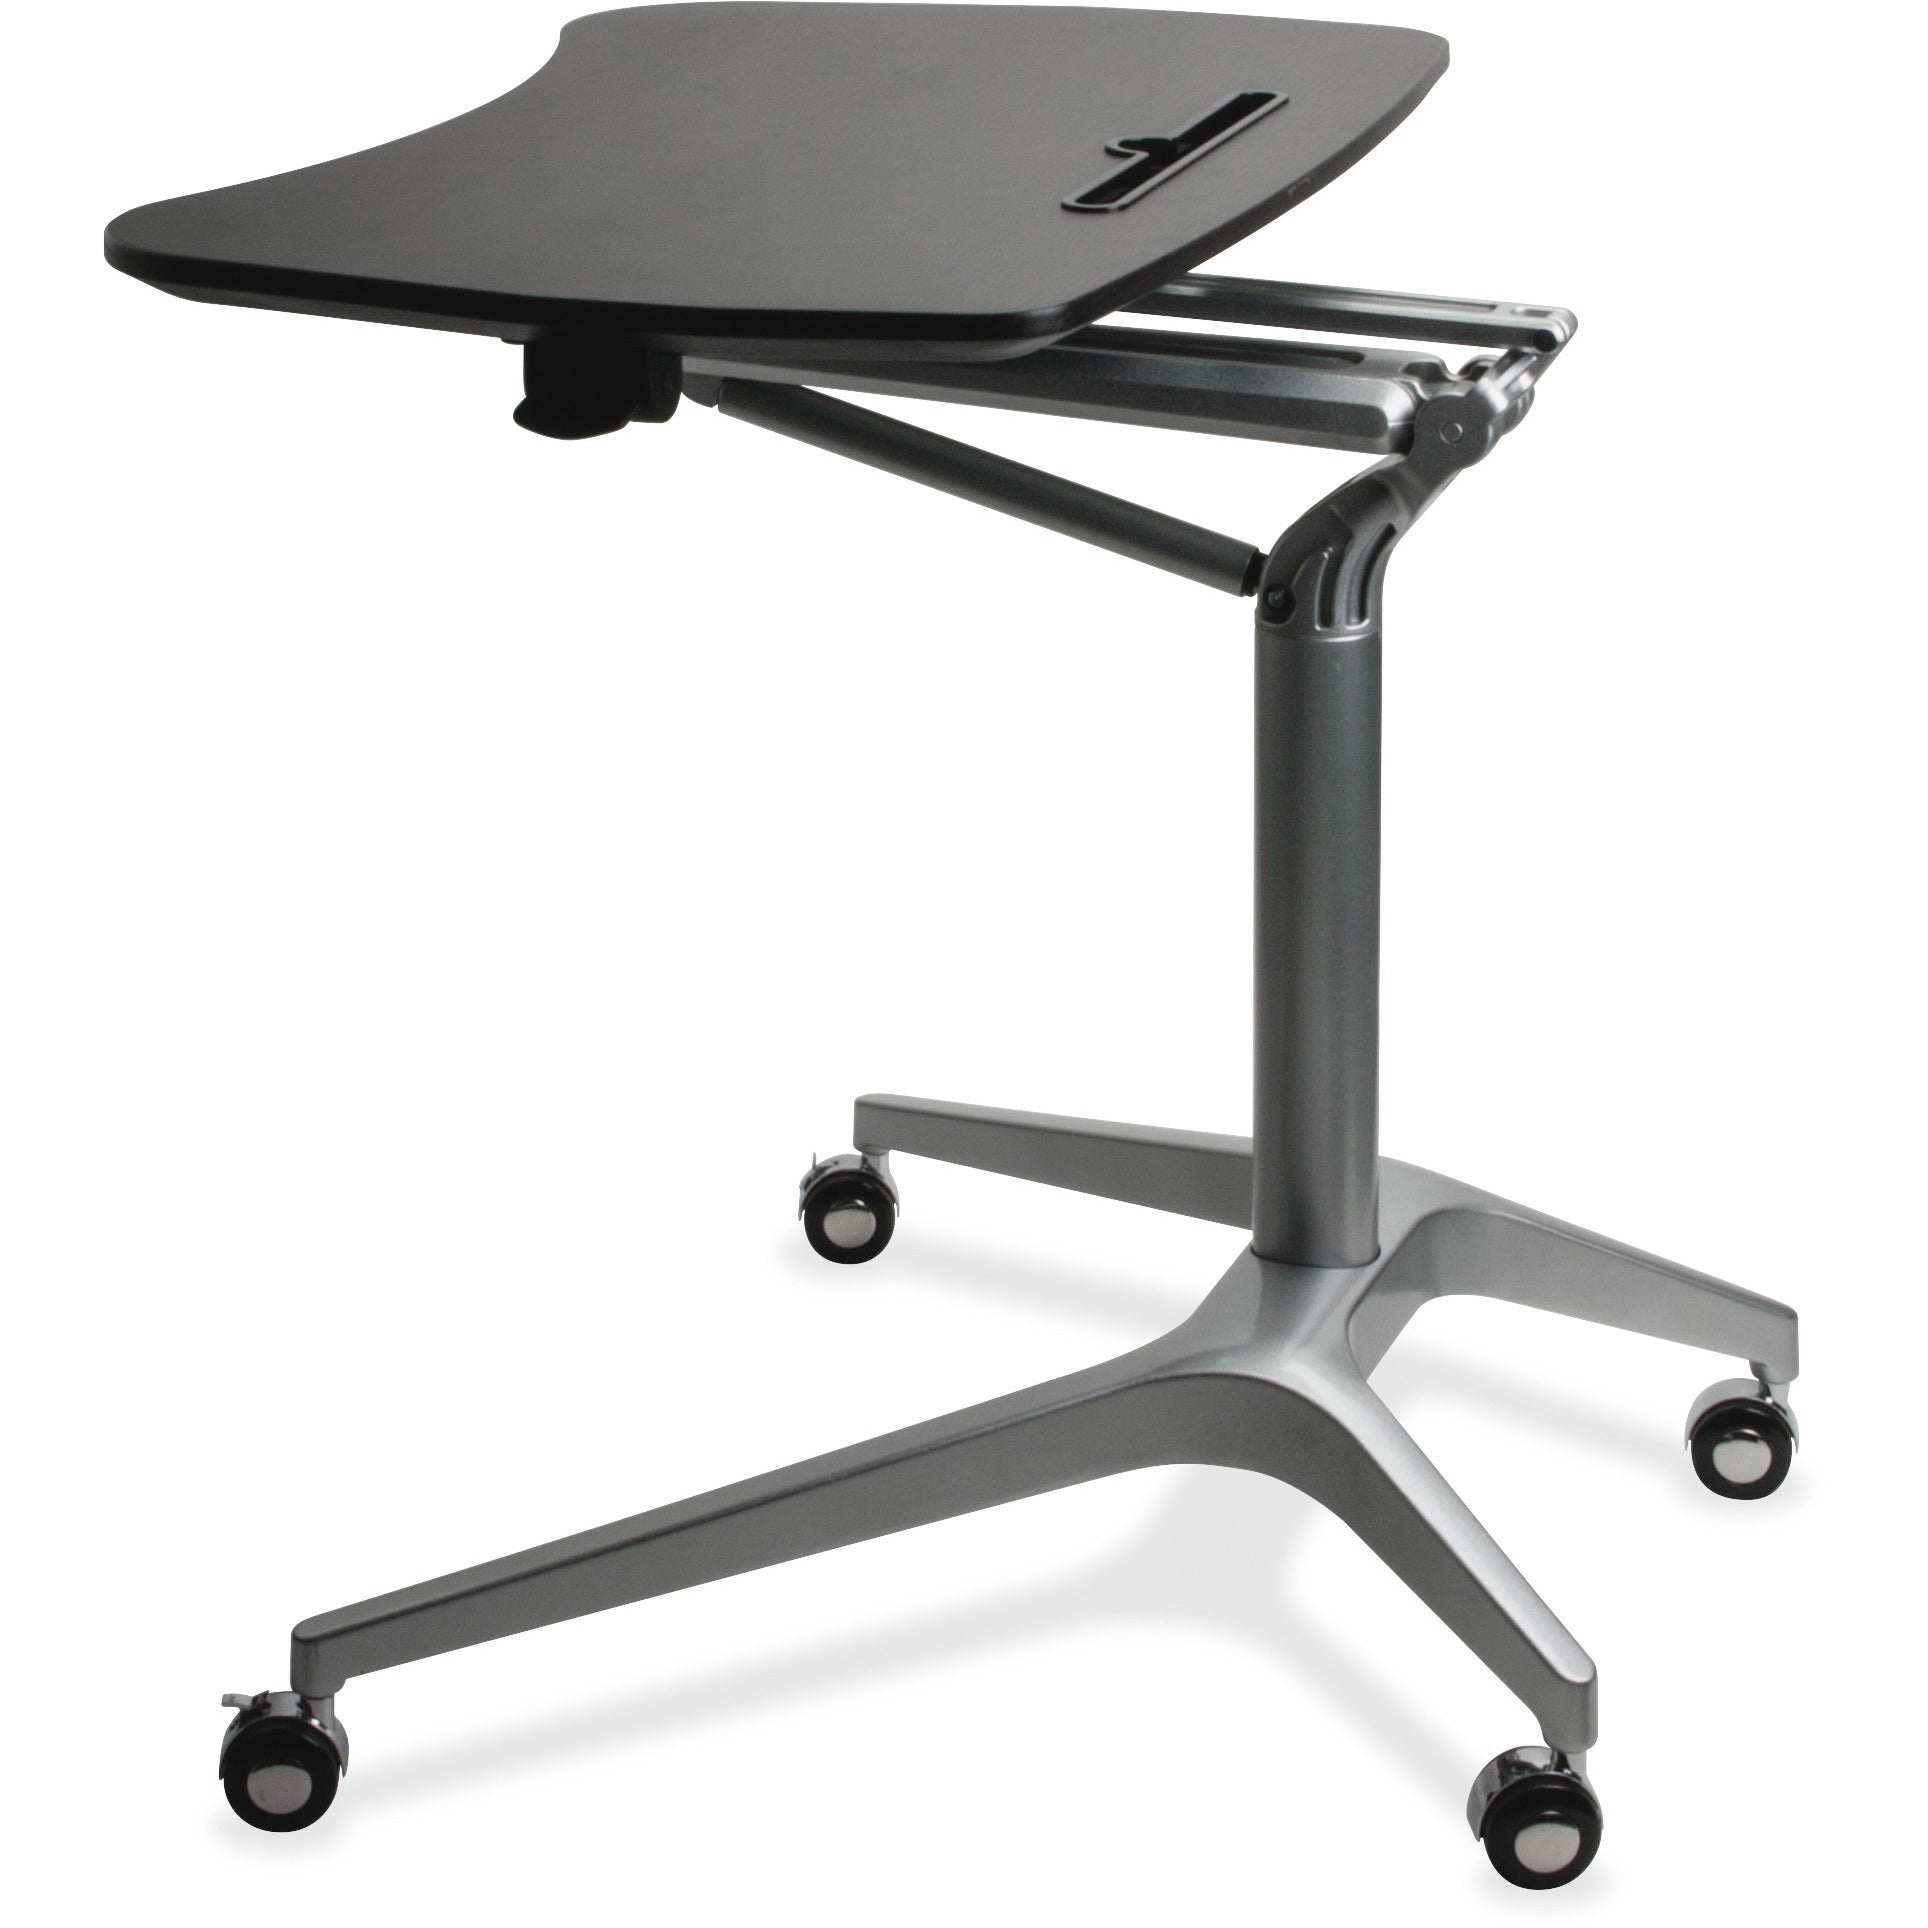 lorell-gas-lift-height-adjustable-mobile-desk-for-table-topblack-rectangle-top-powder-coated-base-adjustable-height-2870-to-4090-adjustment-x-2825-table-top-width-x-1875-table-top-depth-41-height-assembly-required-1-each_llr84838 - 2